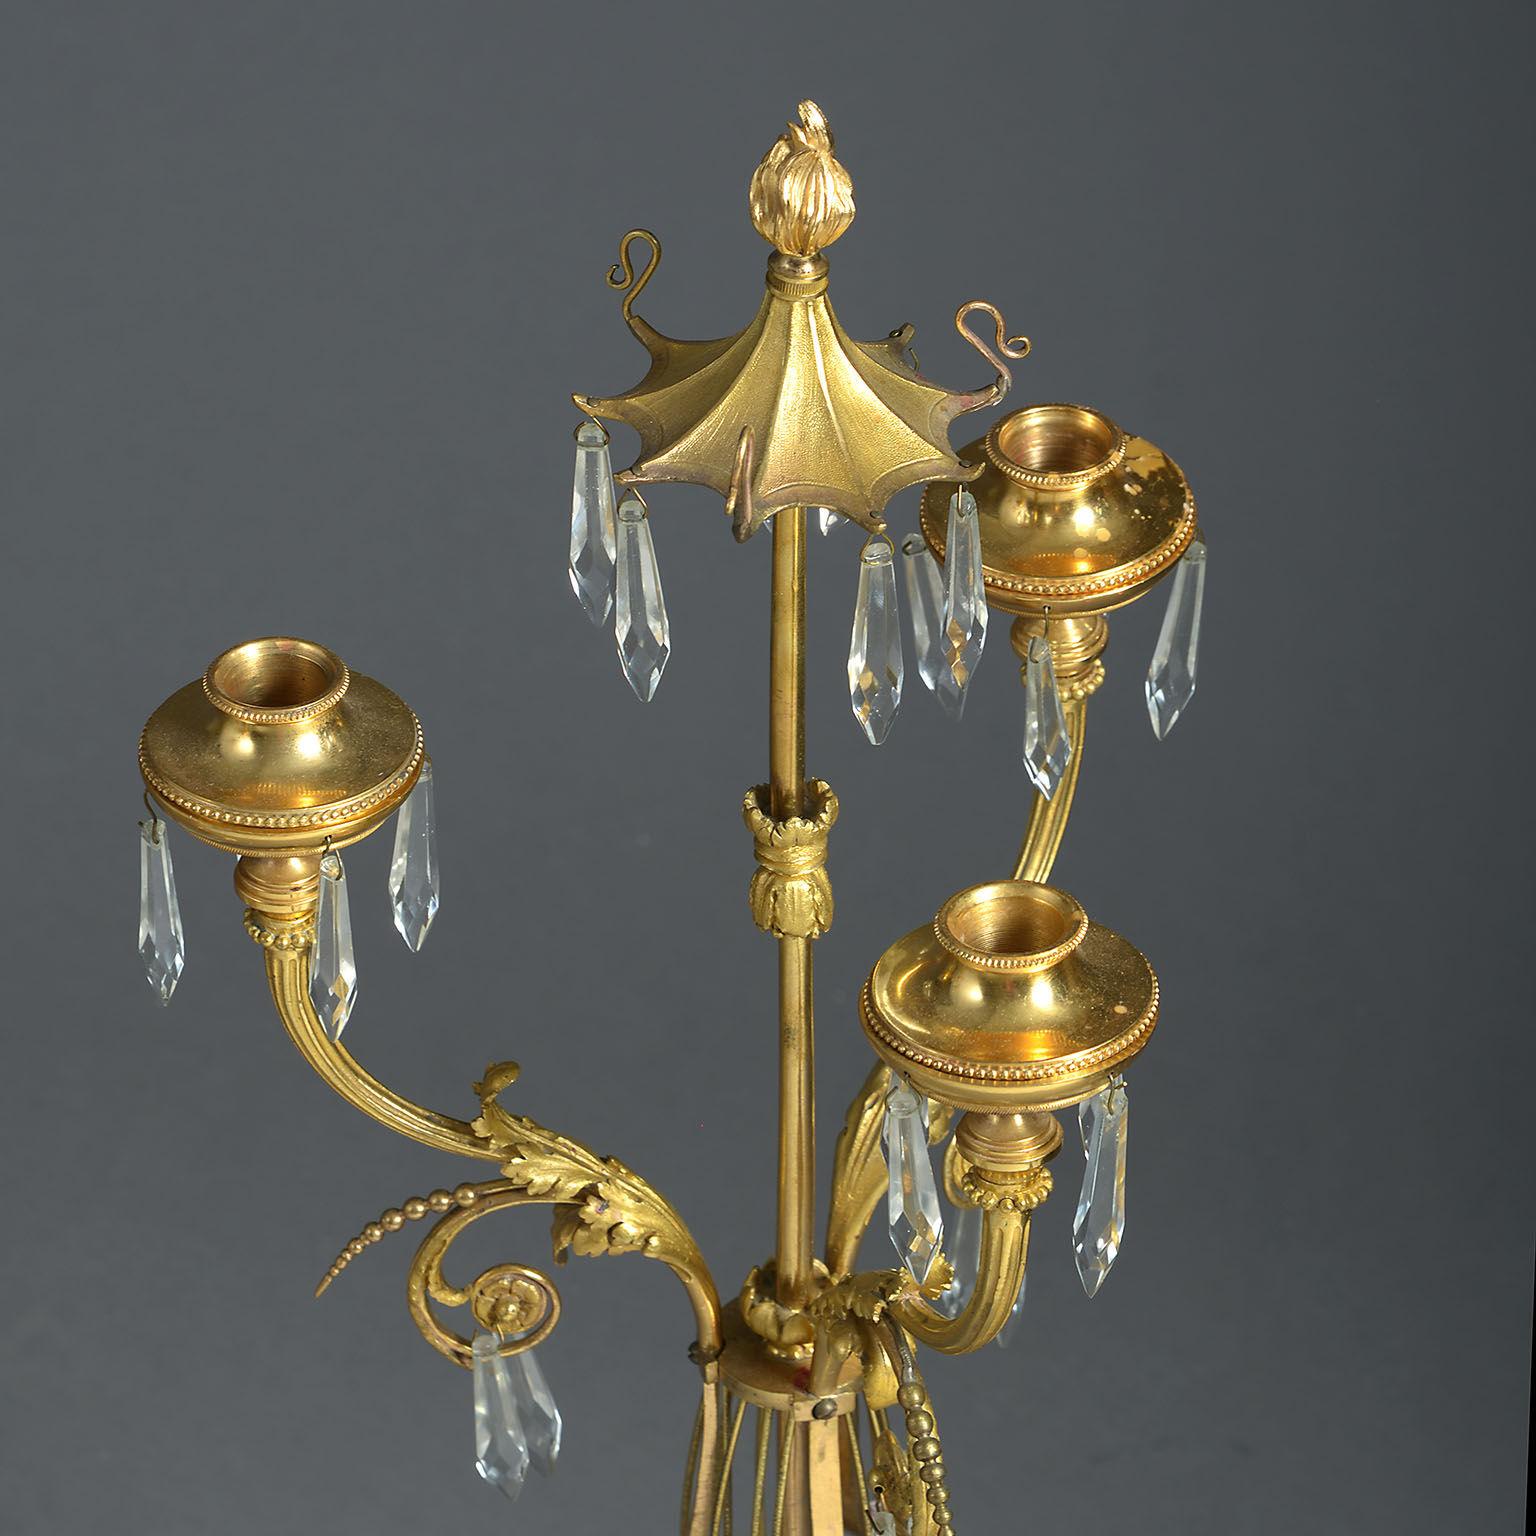 Pair of 19th century Louis-Philippe candelabra. Each with three drop-hung scrolling gilt-metal candle arms with central pagoda hung with crystal drops on a gilt-metal central stem of stylized lyre form standing on ormolu-mounted turned Carrara and